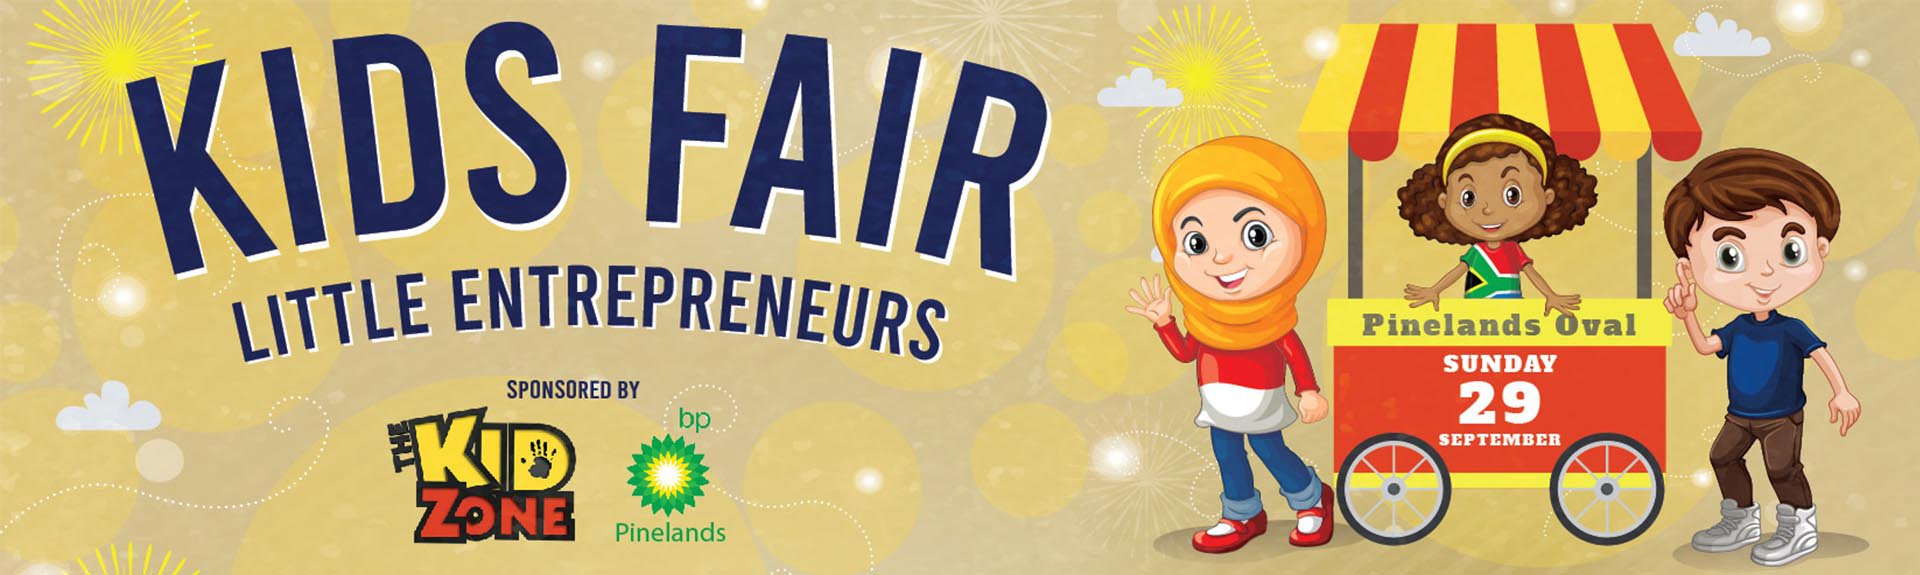 Time for fun and learning at the Little Entrepreneurs Kids Fair